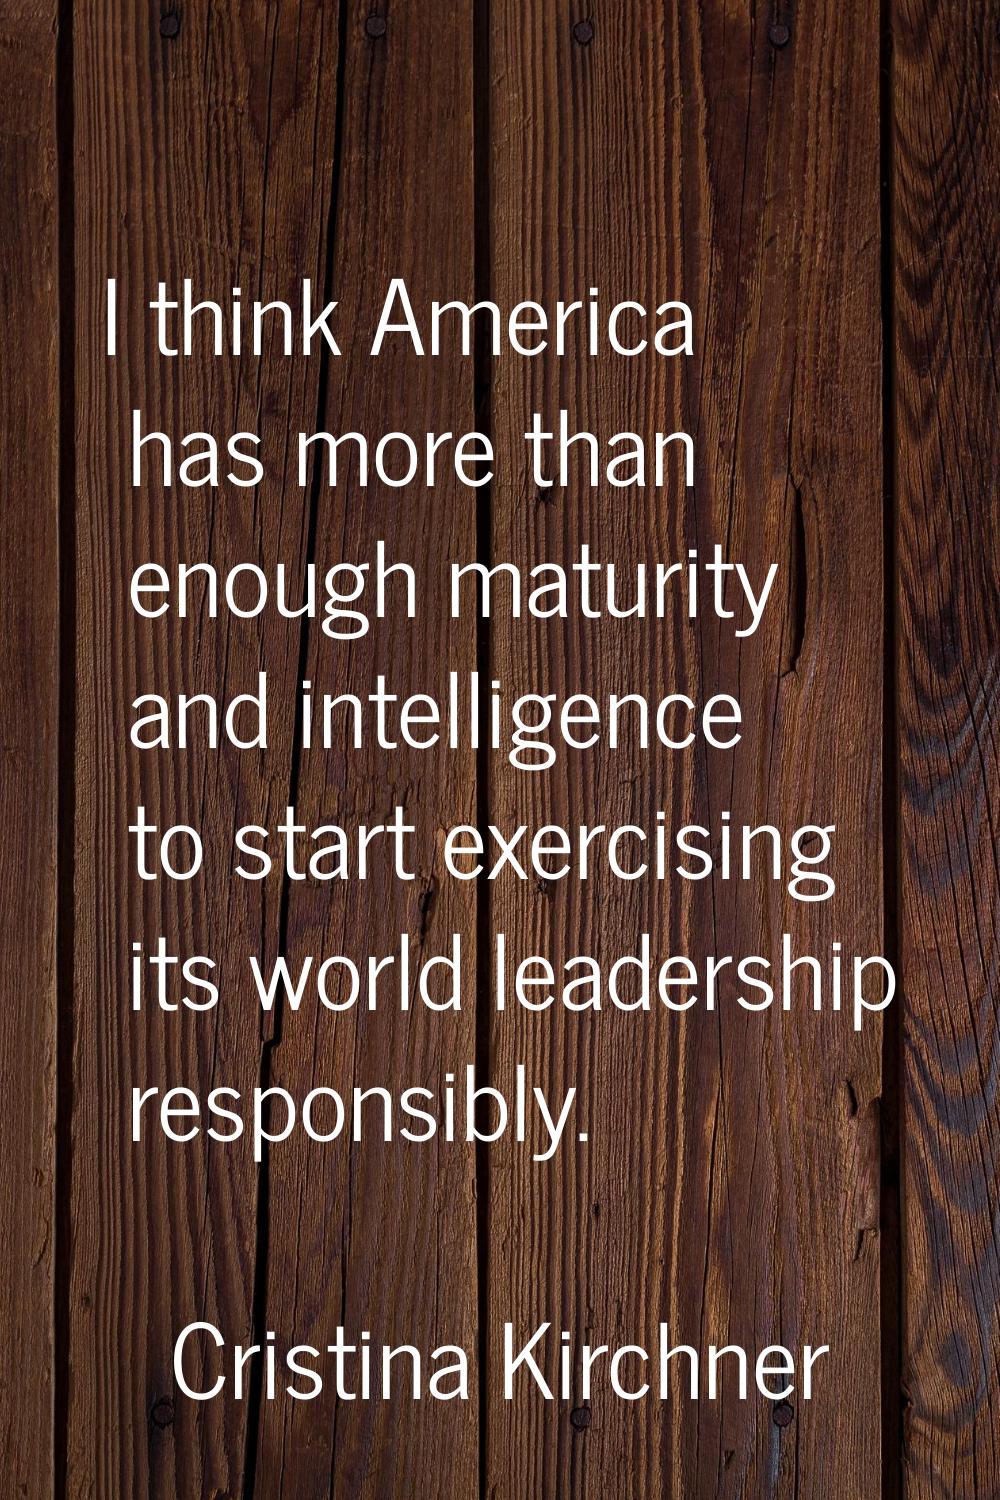 I think America has more than enough maturity and intelligence to start exercising its world leader